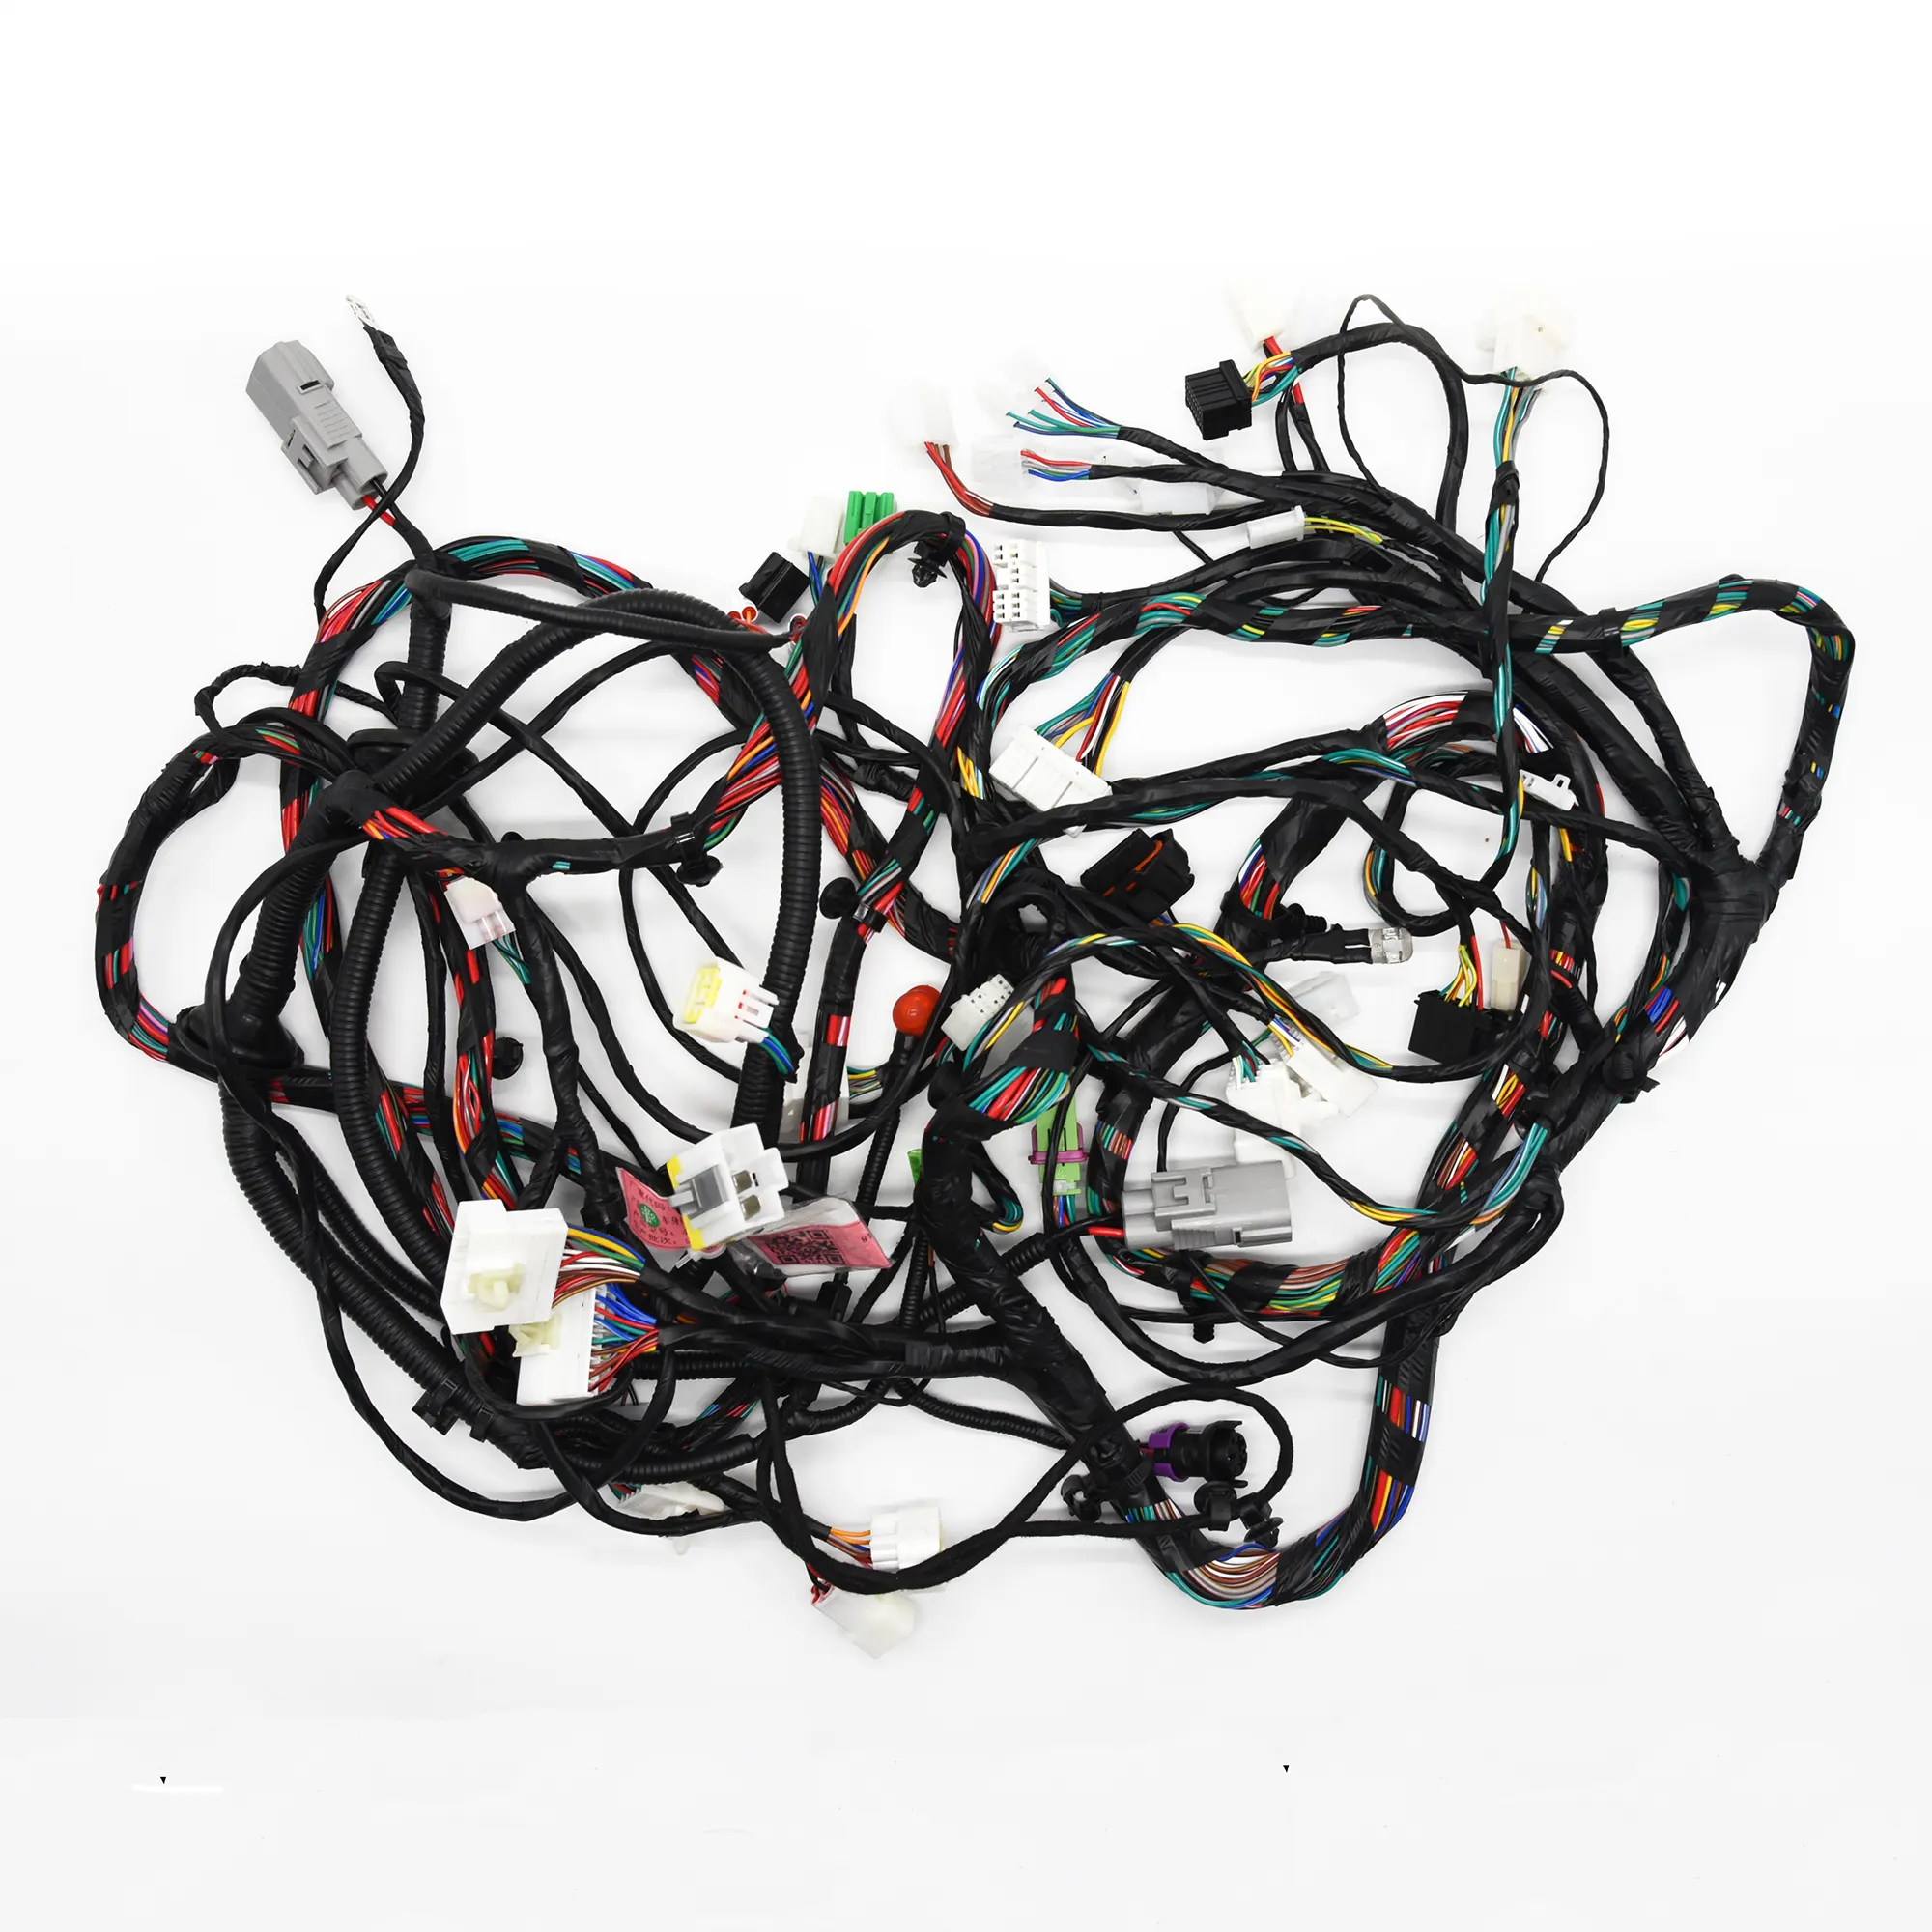 Customized electric motorcycle cable kit automotive wire harness car wire loom